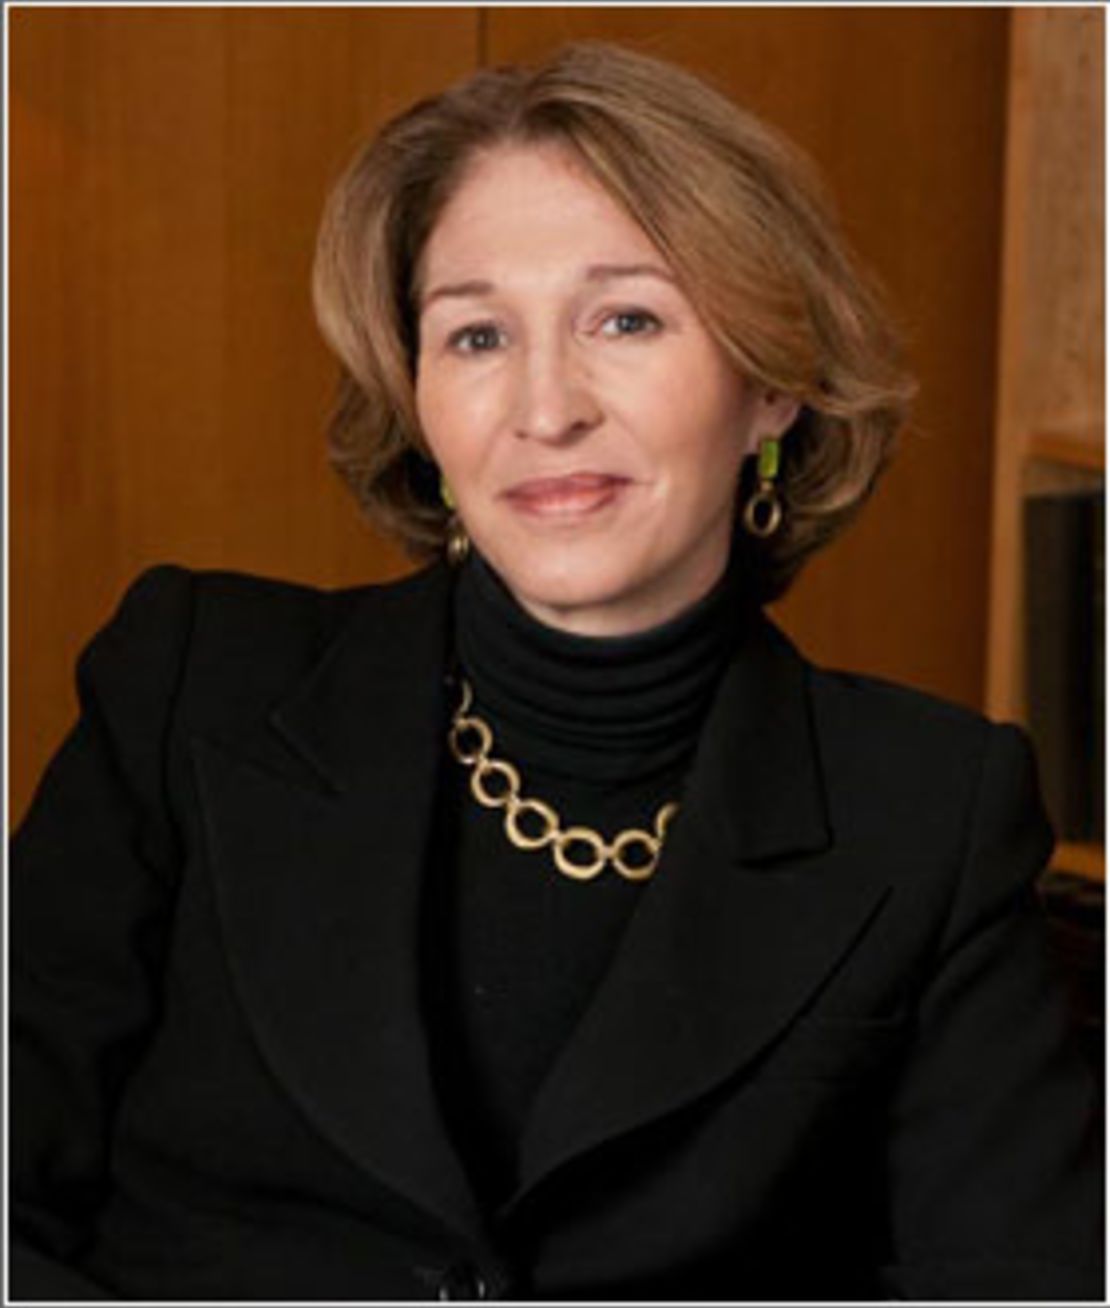 Anne-Marie Slaughter is a former director of policy planning in the U.S. State Department and a professor of politics and international affairs at Princeton University.